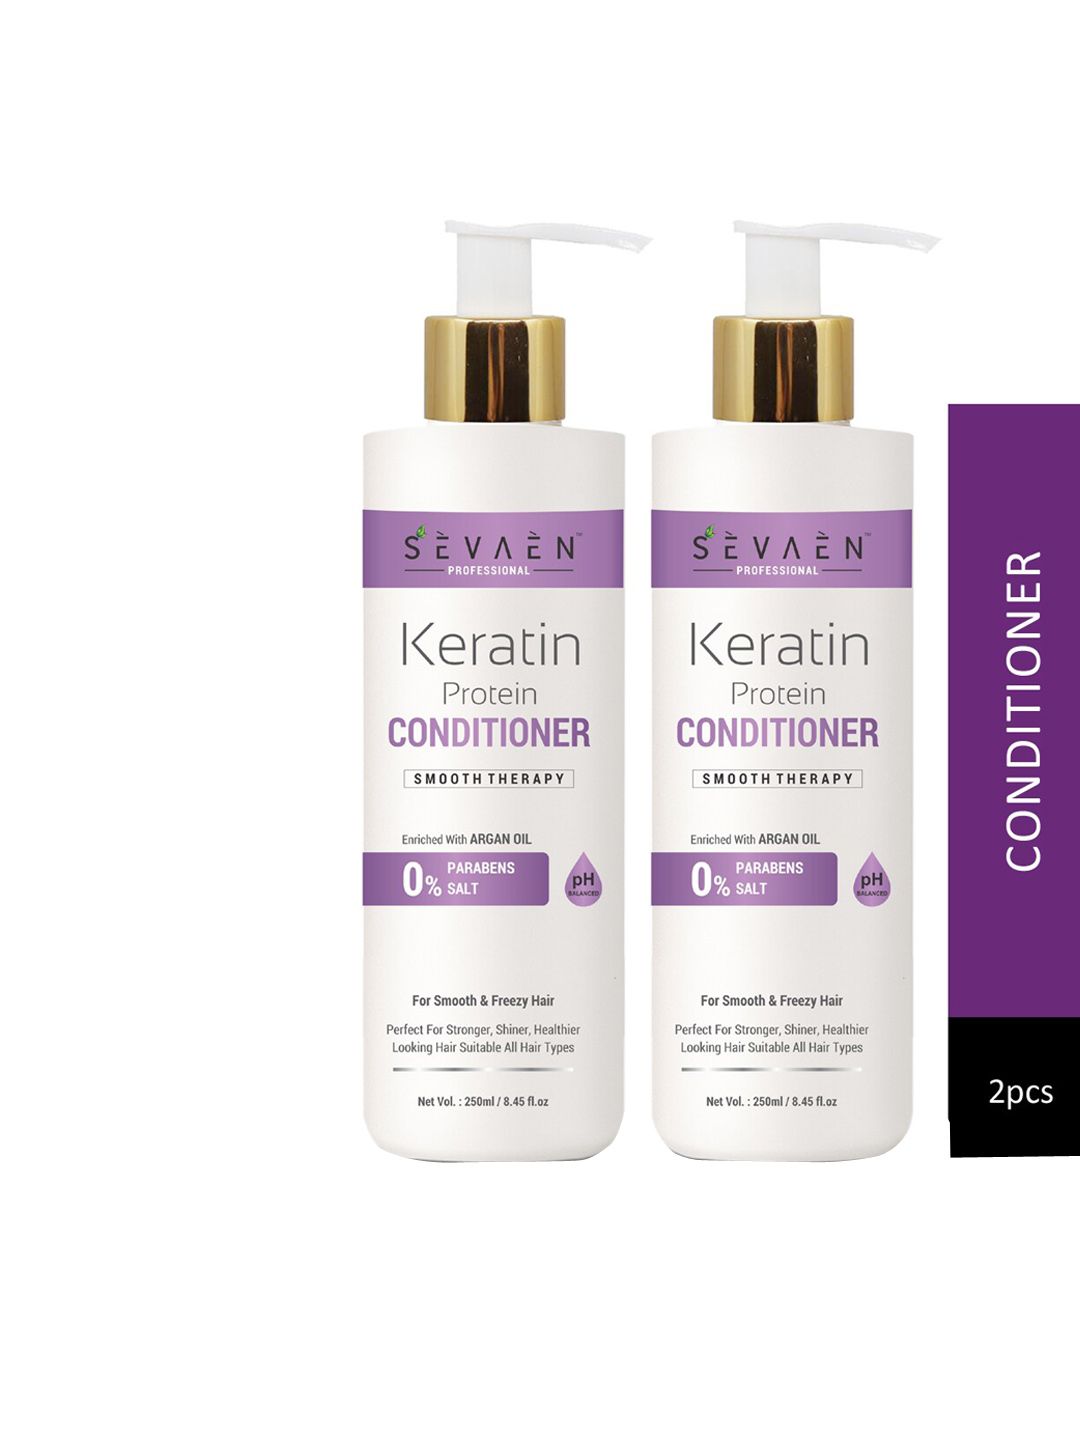 SEVAEN Set of 2 Smooth Therapy Keratin Protein Conditioners with Argan Oil - 250ml each Price in India